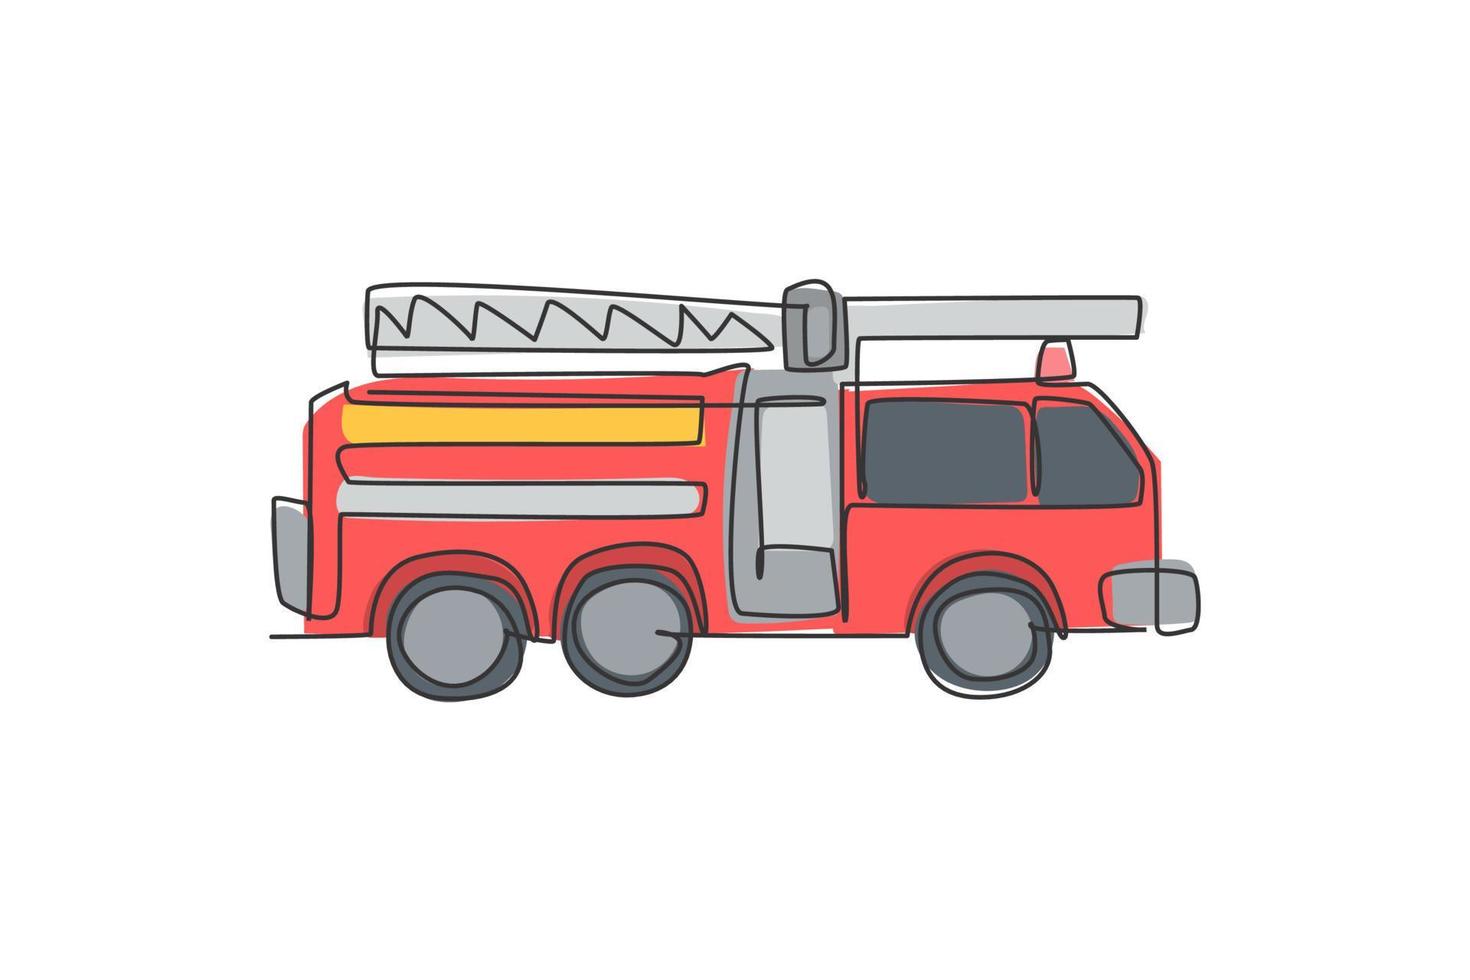 Continuous one line drawing of emergency road vehicle fire engine. Fire truck rescue as fire fighter apparatus hand drawn minimalist concept. Modern single line draw design vector graphic illustration